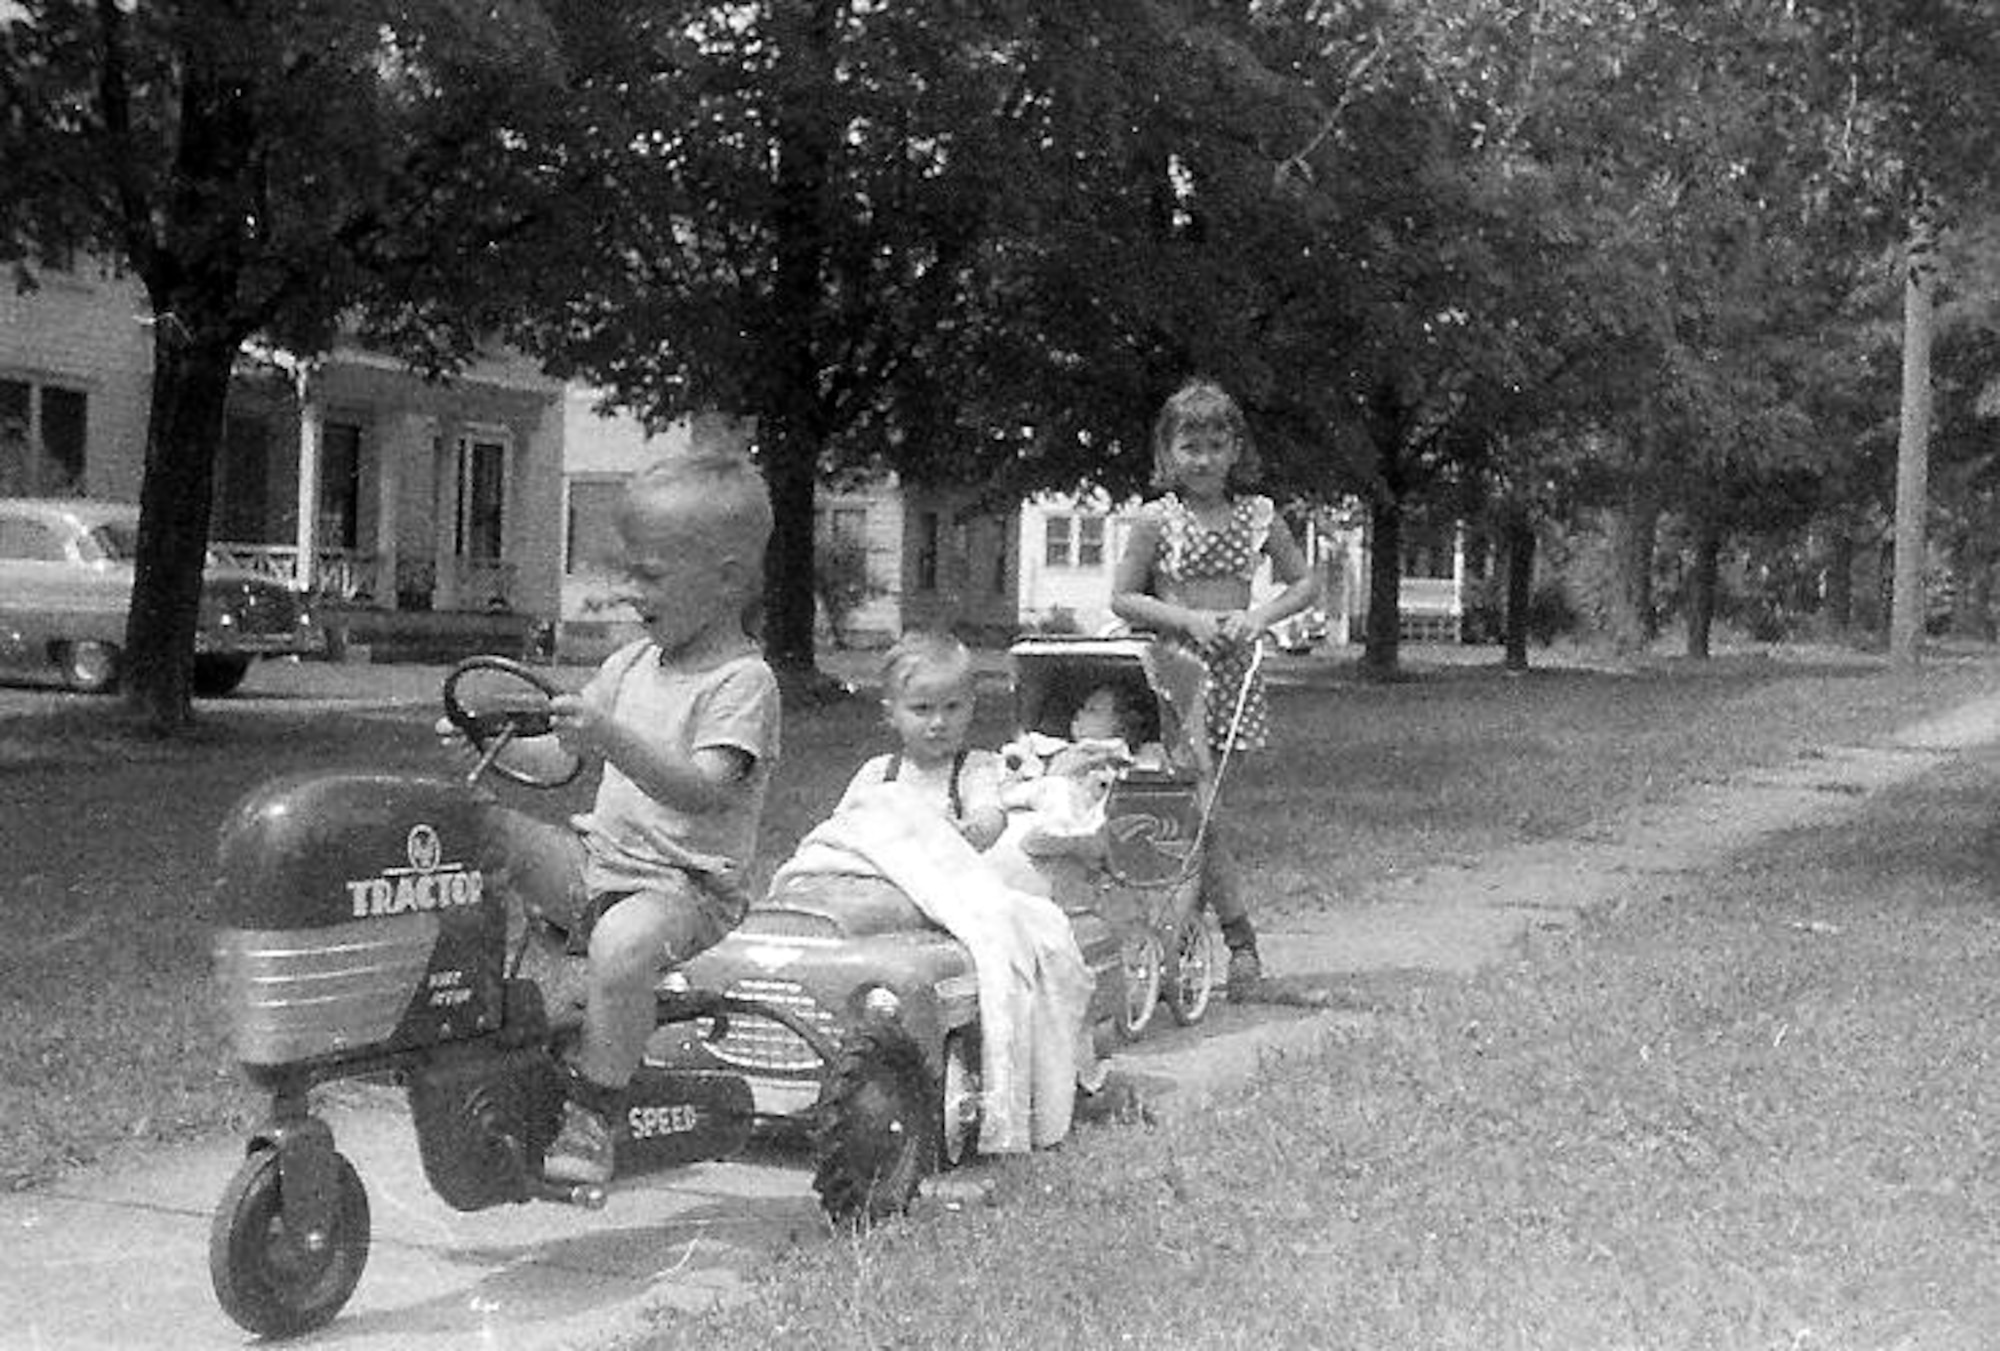 L-R:  Eric, Gary and Janis Crabtree playing in their Cassadaga, N.Y. neighborhood in the late 50s.  Maj. Gen. Eric Crabtree is now commander, Headquarters Fourth Air Force, March Air Reserve Base, Calif.  He began leading troops and giving orders at an early age, as depicted here.  (Courtesy photo)  